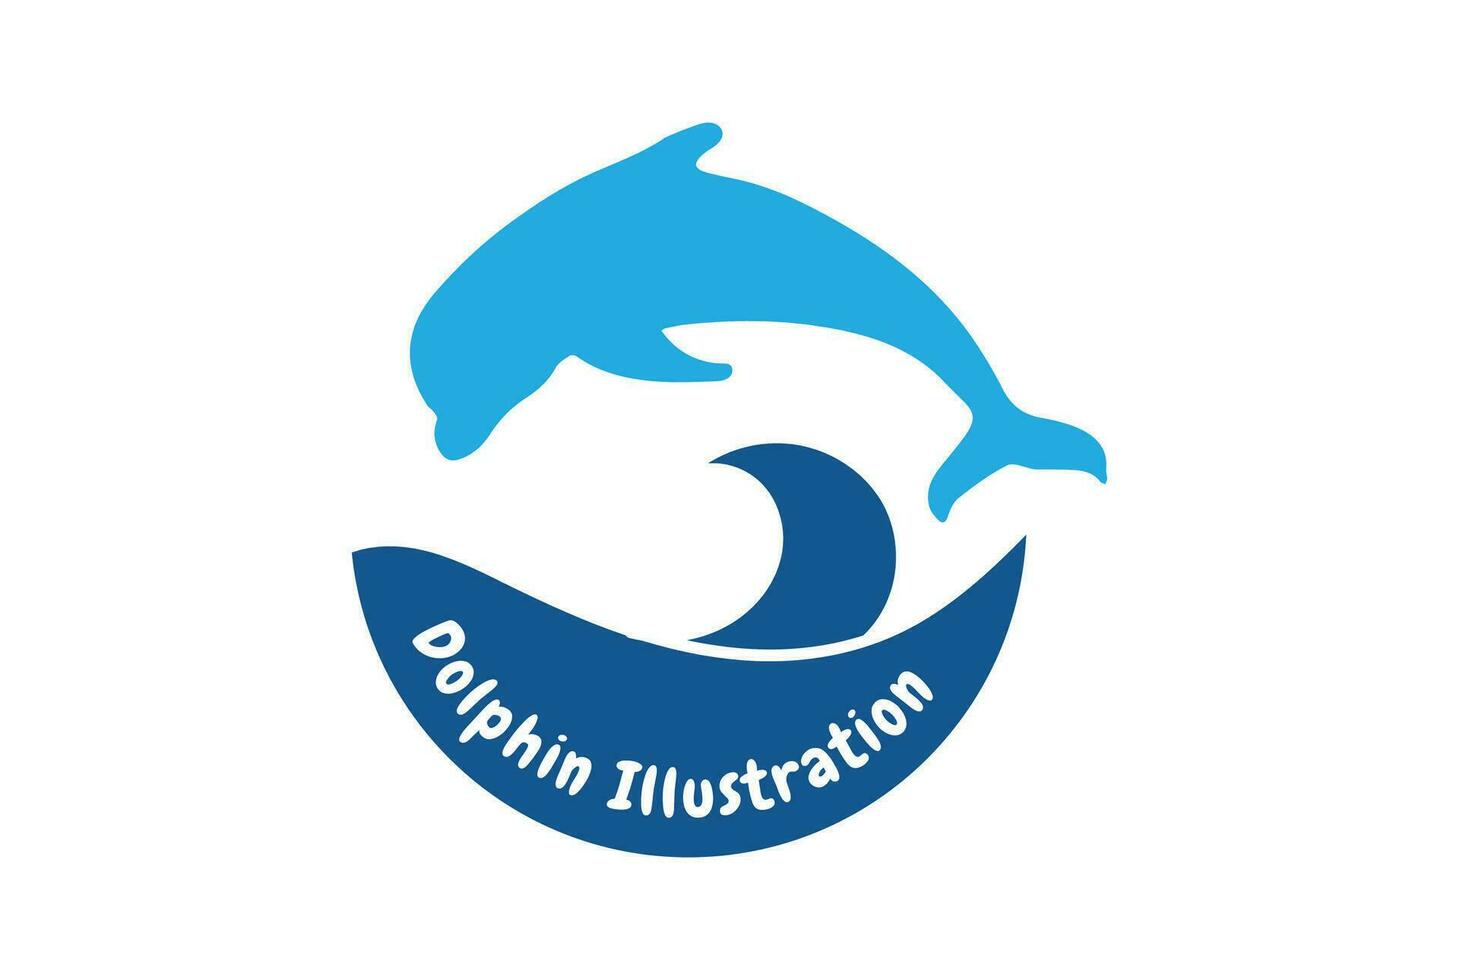 Ocean Sea Wave with Jumping Dolphin Icon Illustration Vector